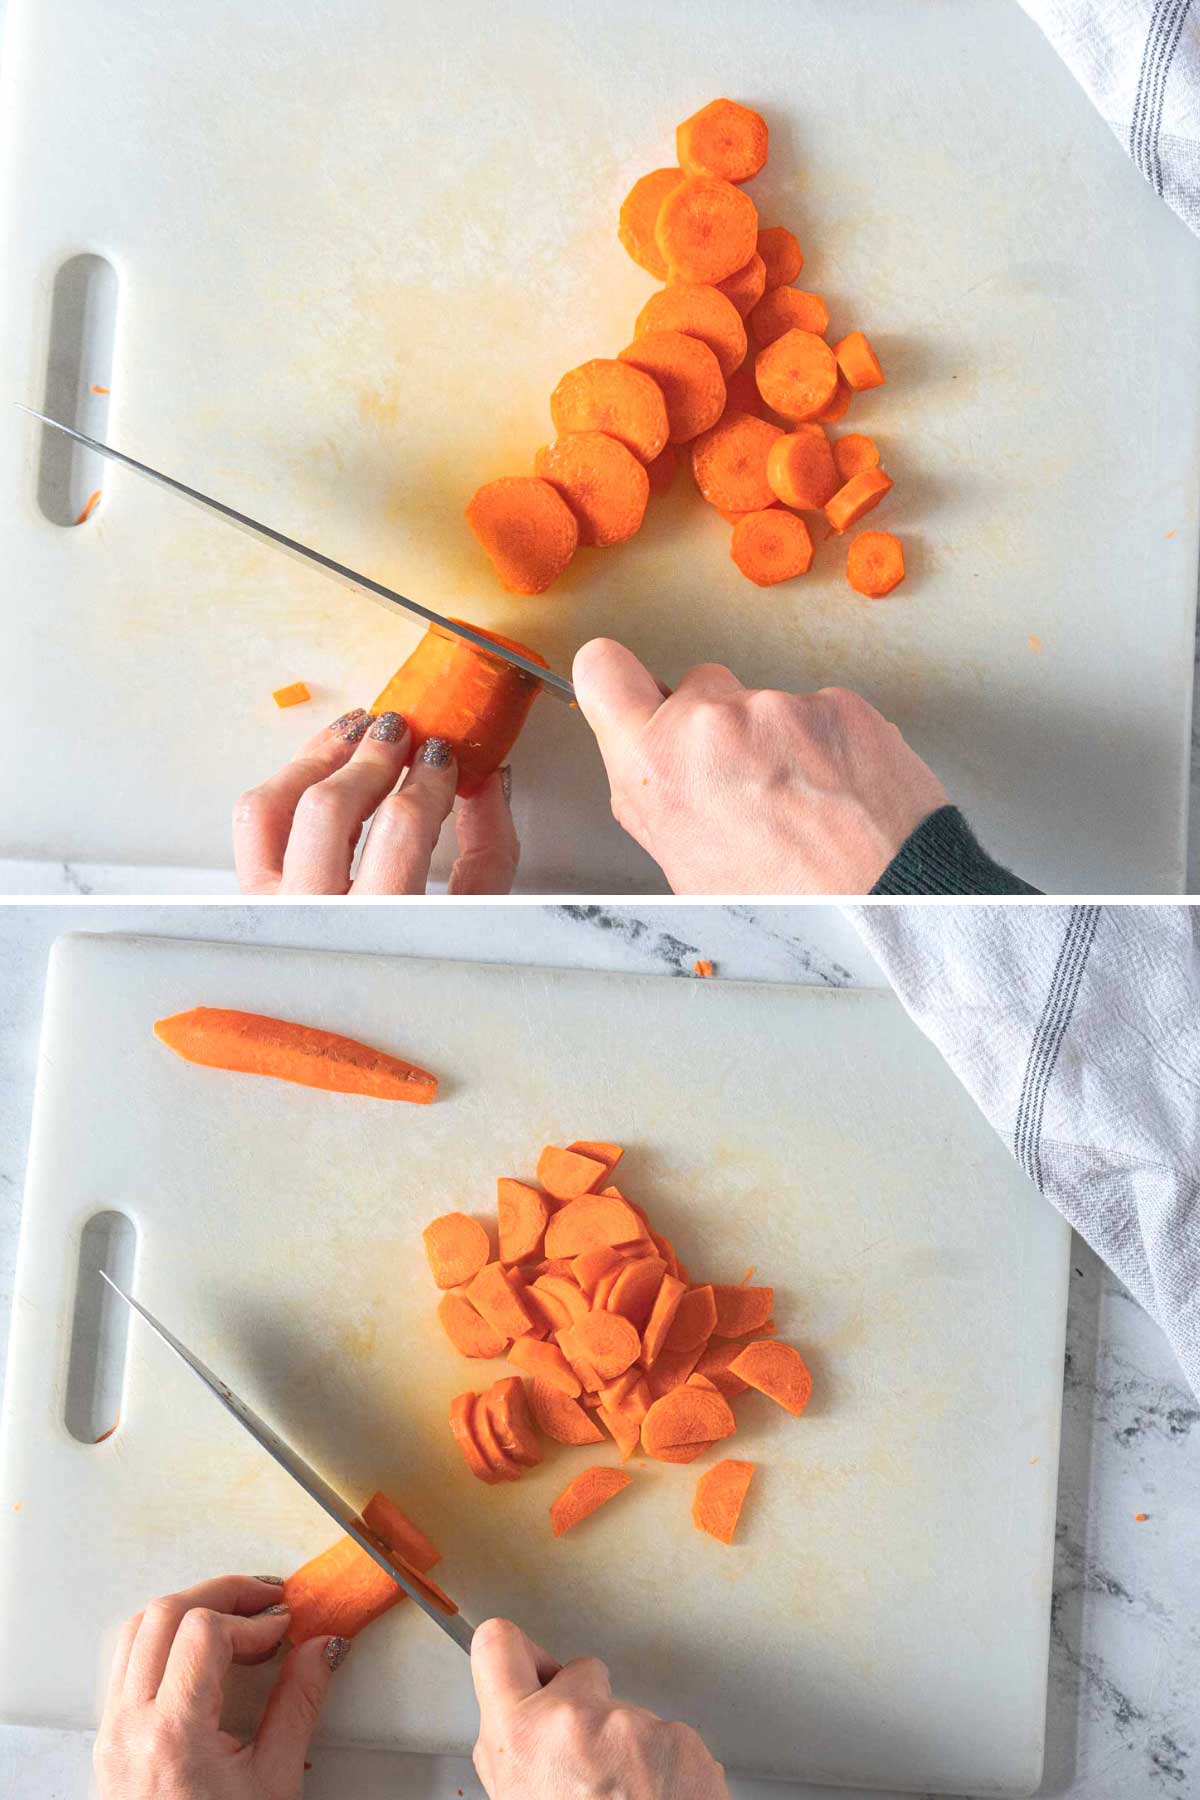 Carrots on cutting board cut into rounds and half moons.